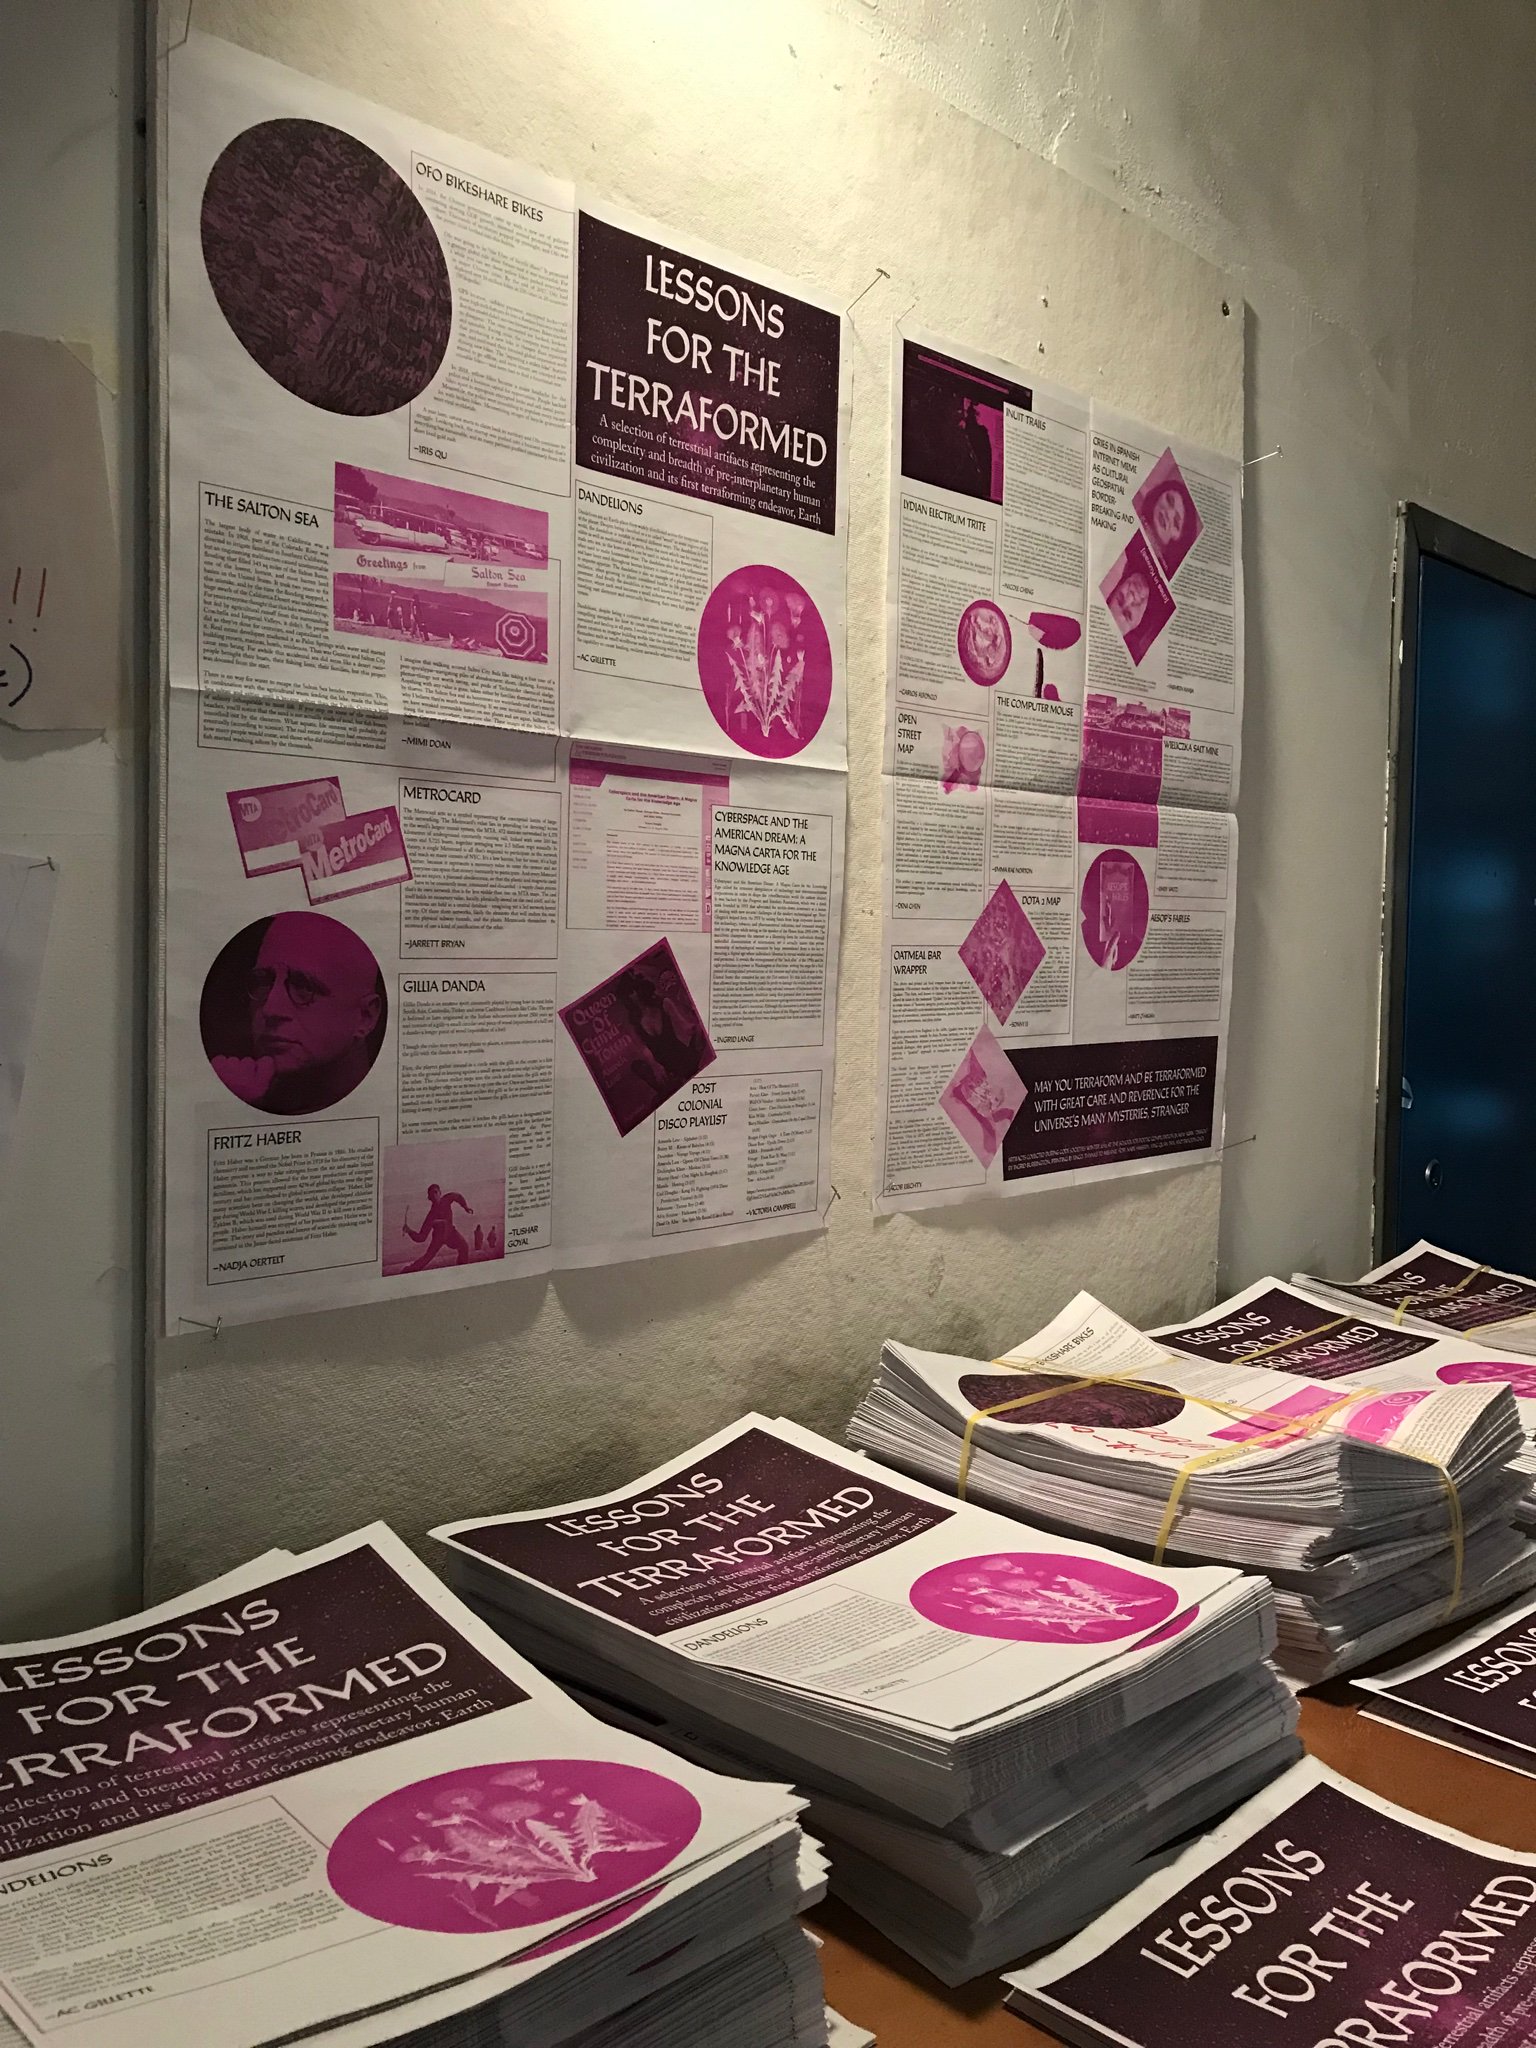 Our terraformer time capsule newsletter entitled "Lessons for the Terraformed" hung on the notice board and stacked on the table at the Code Societies Winter 2019 Showcase.